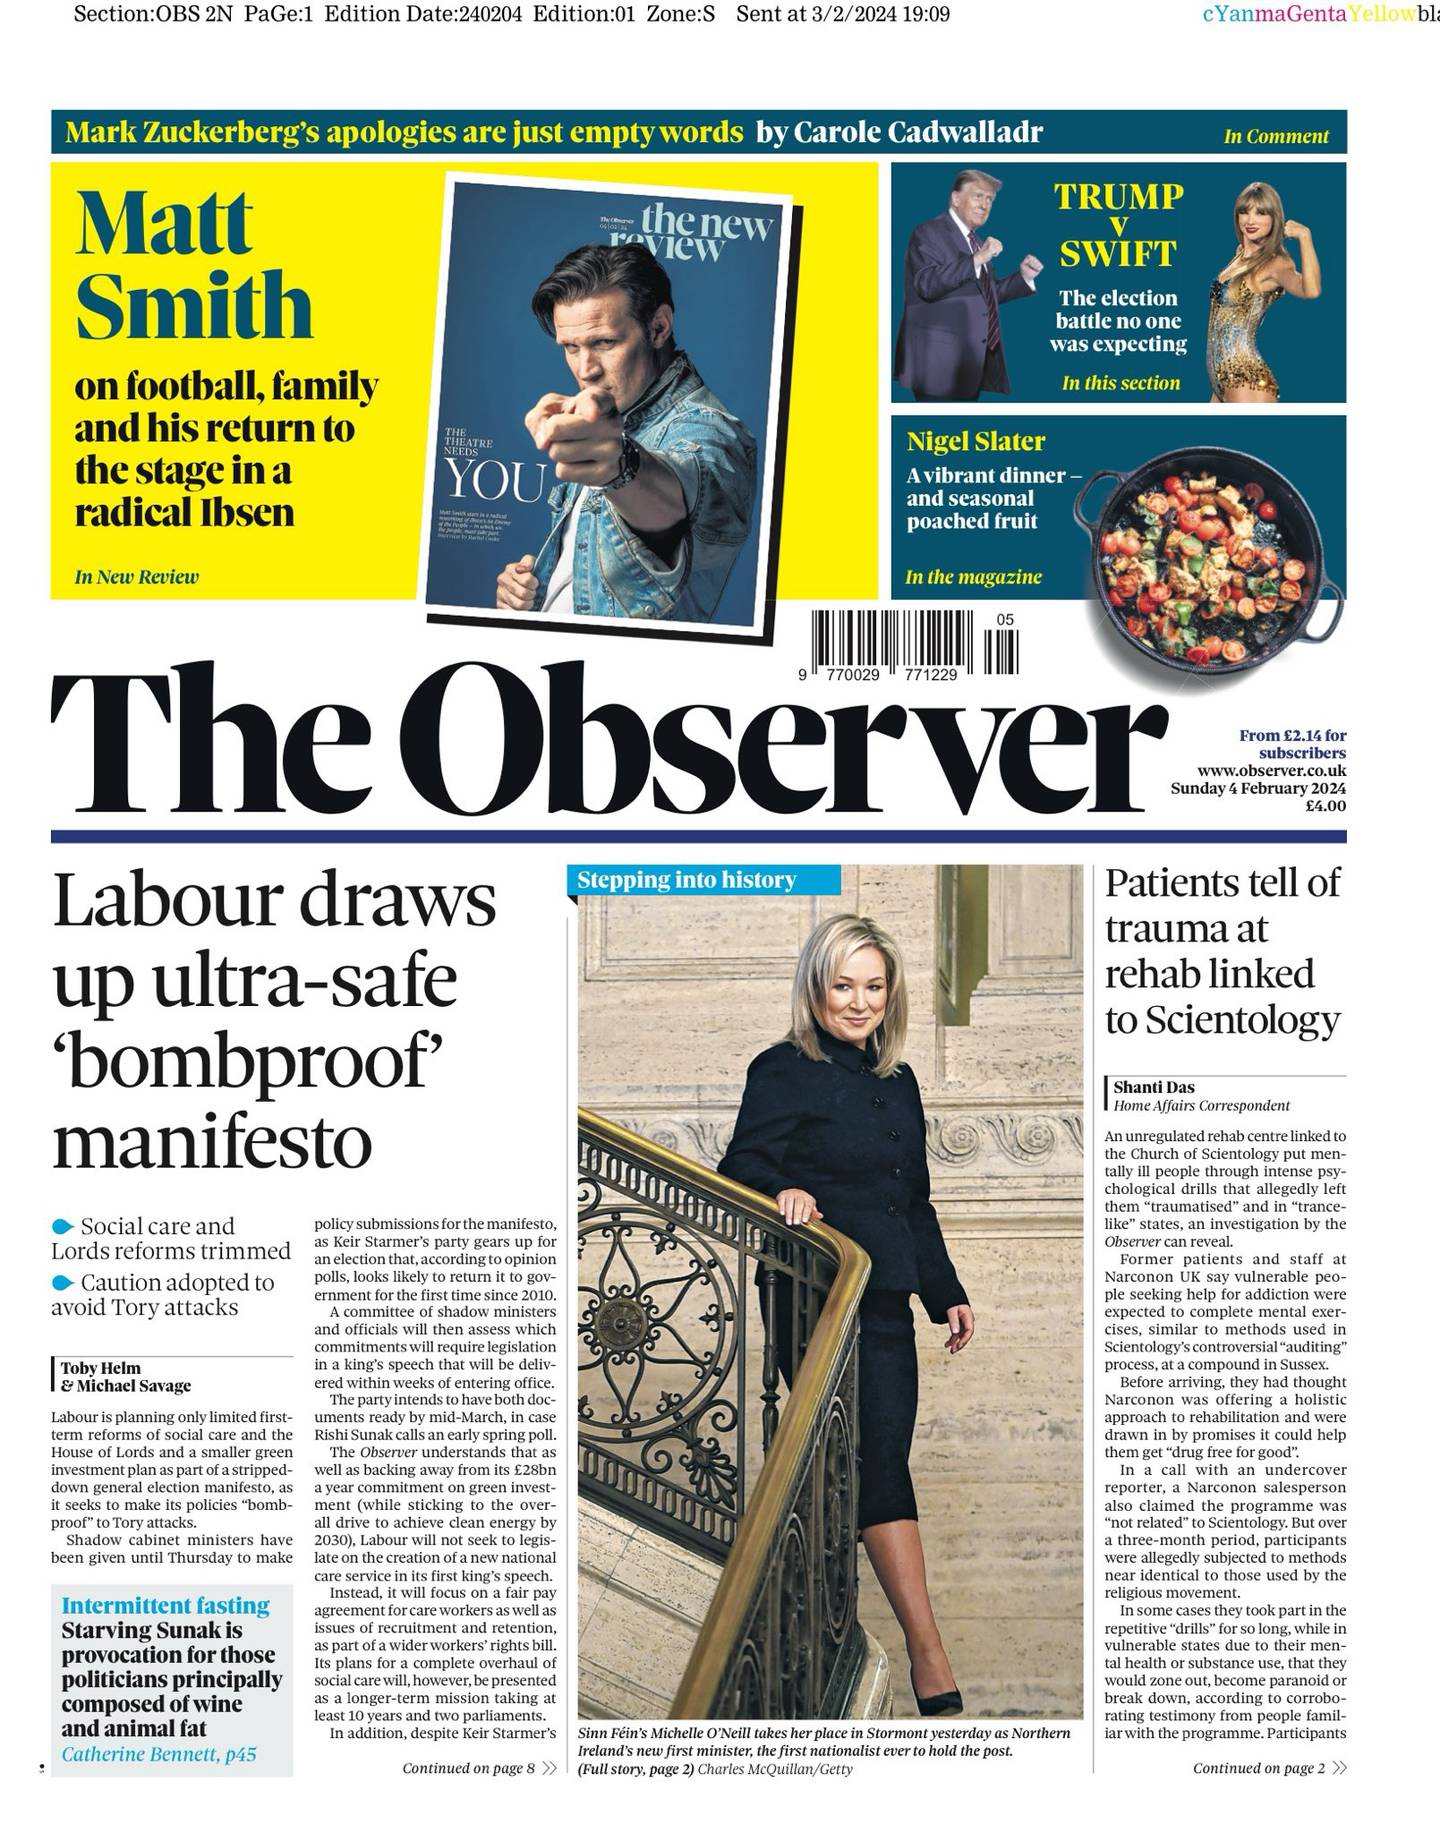 The Observer front page